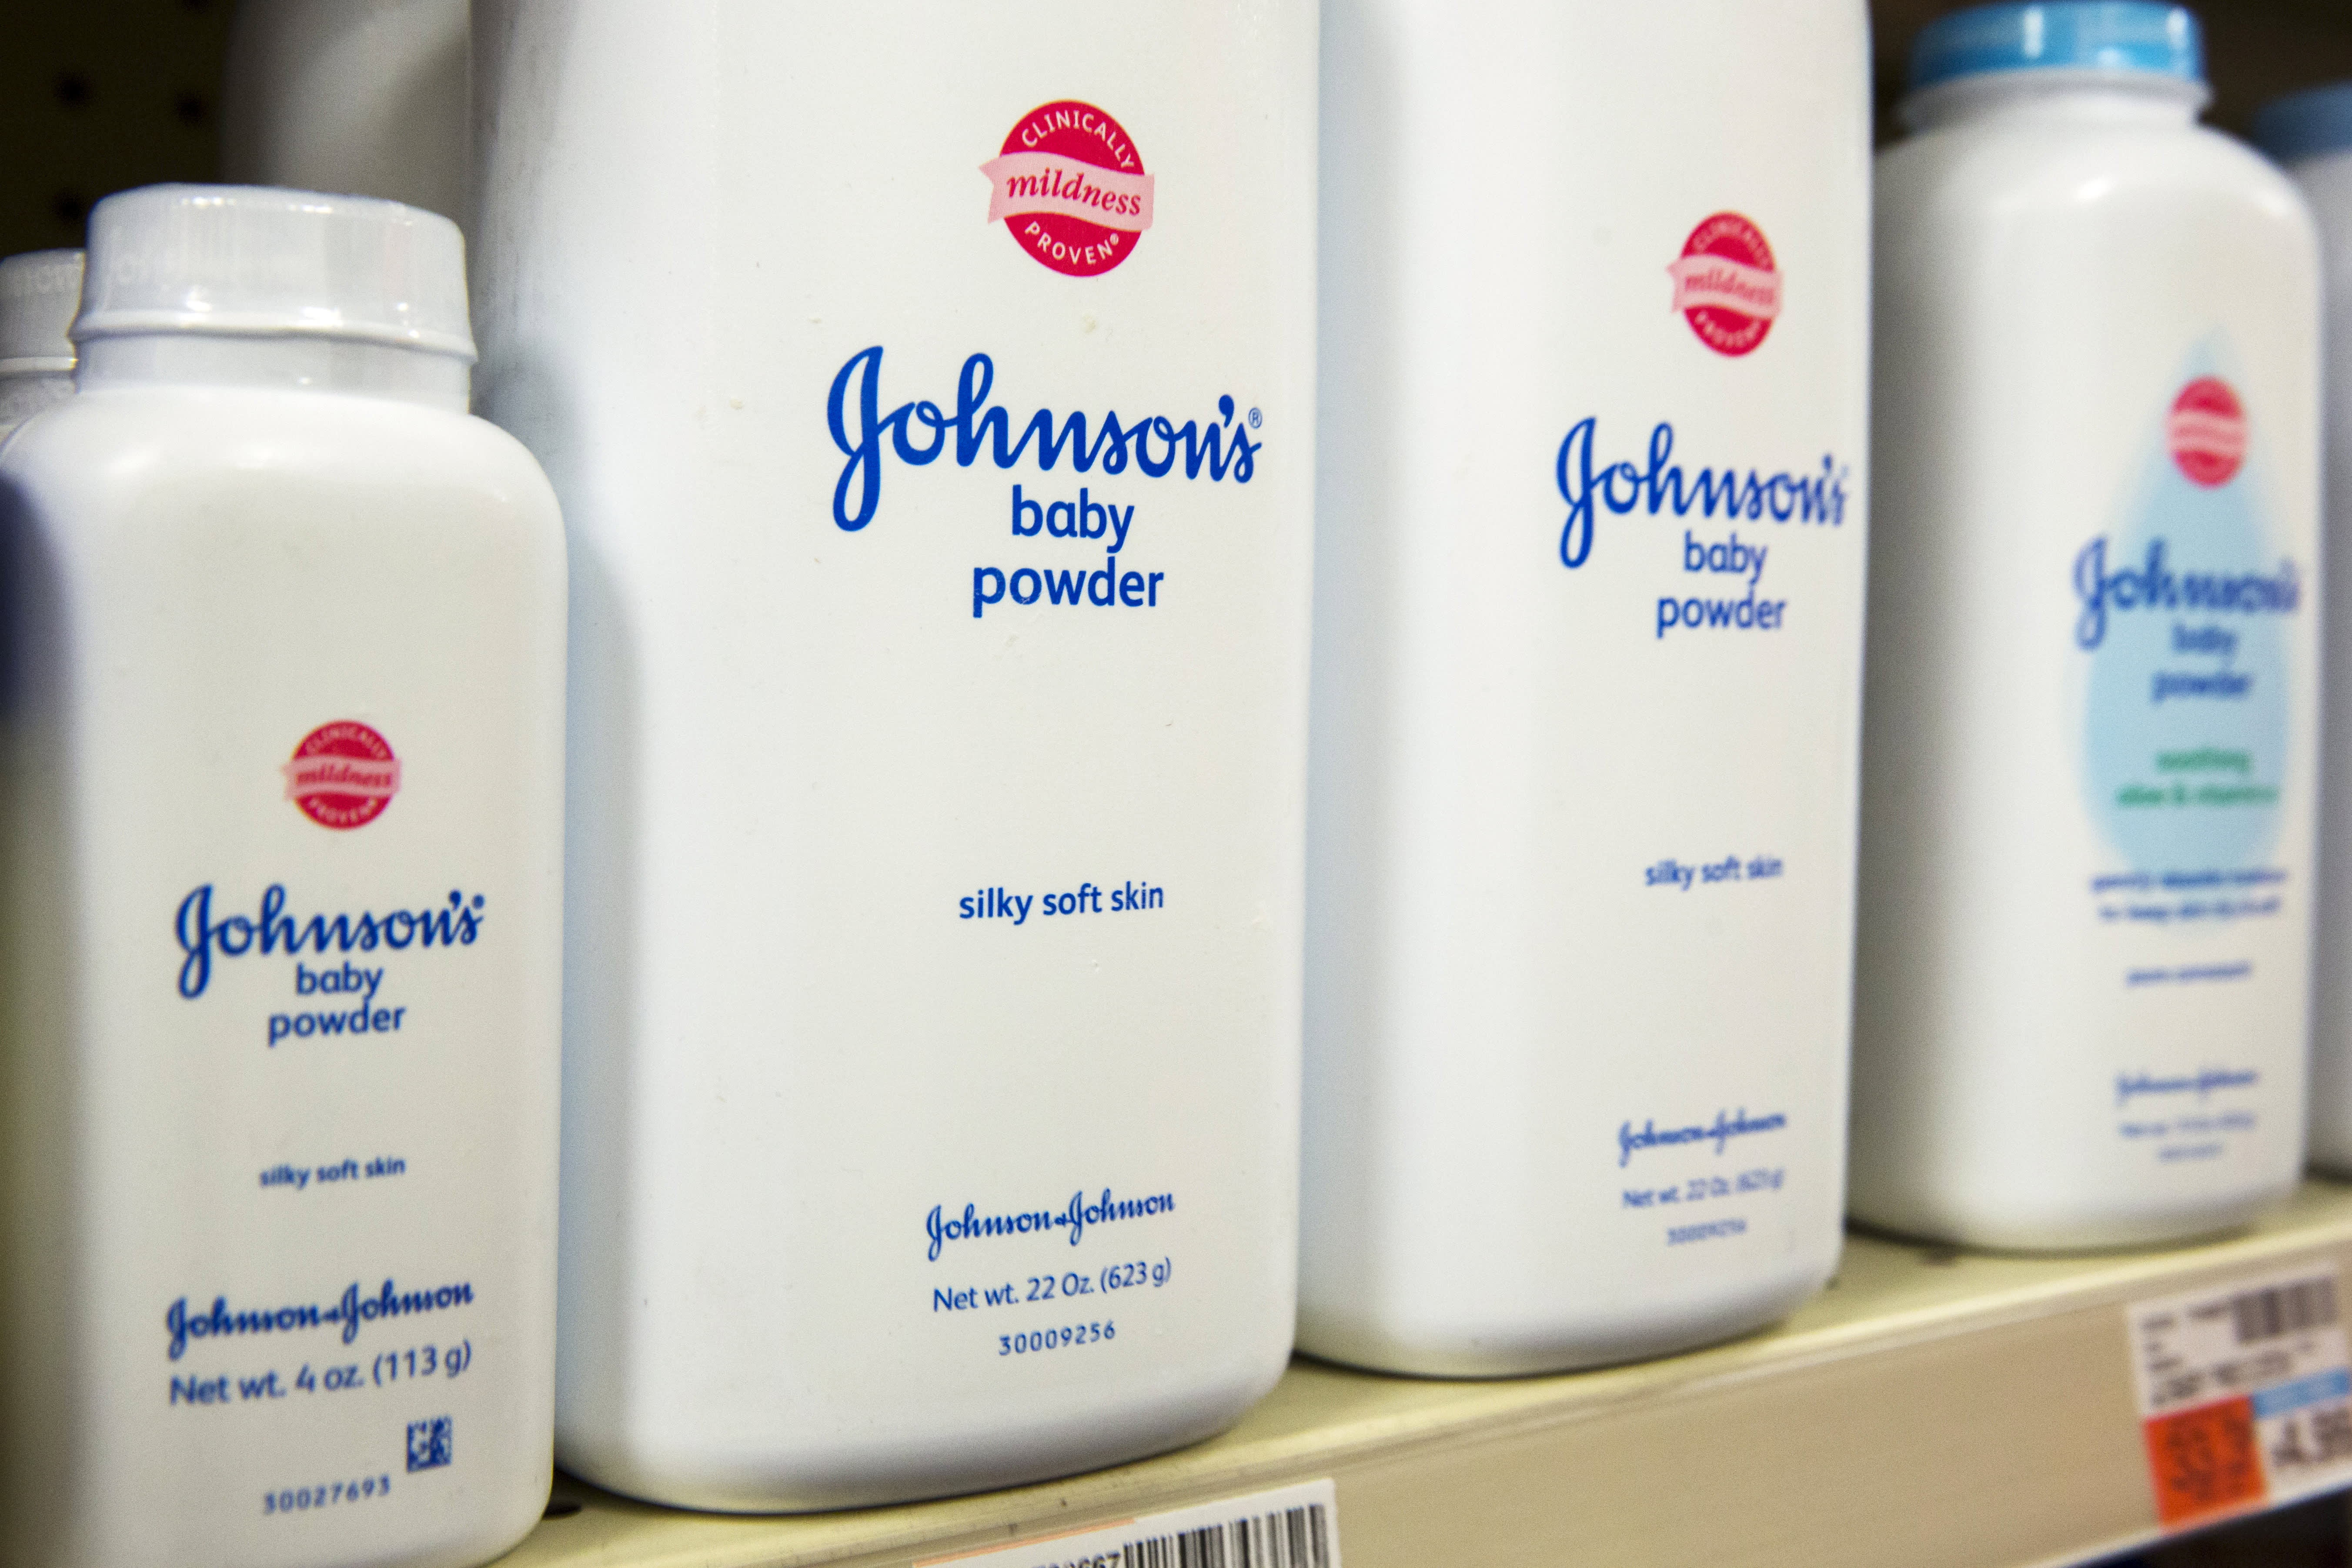 J&J, Colgate ordered to pay nearly $10 million in California talc cancer case